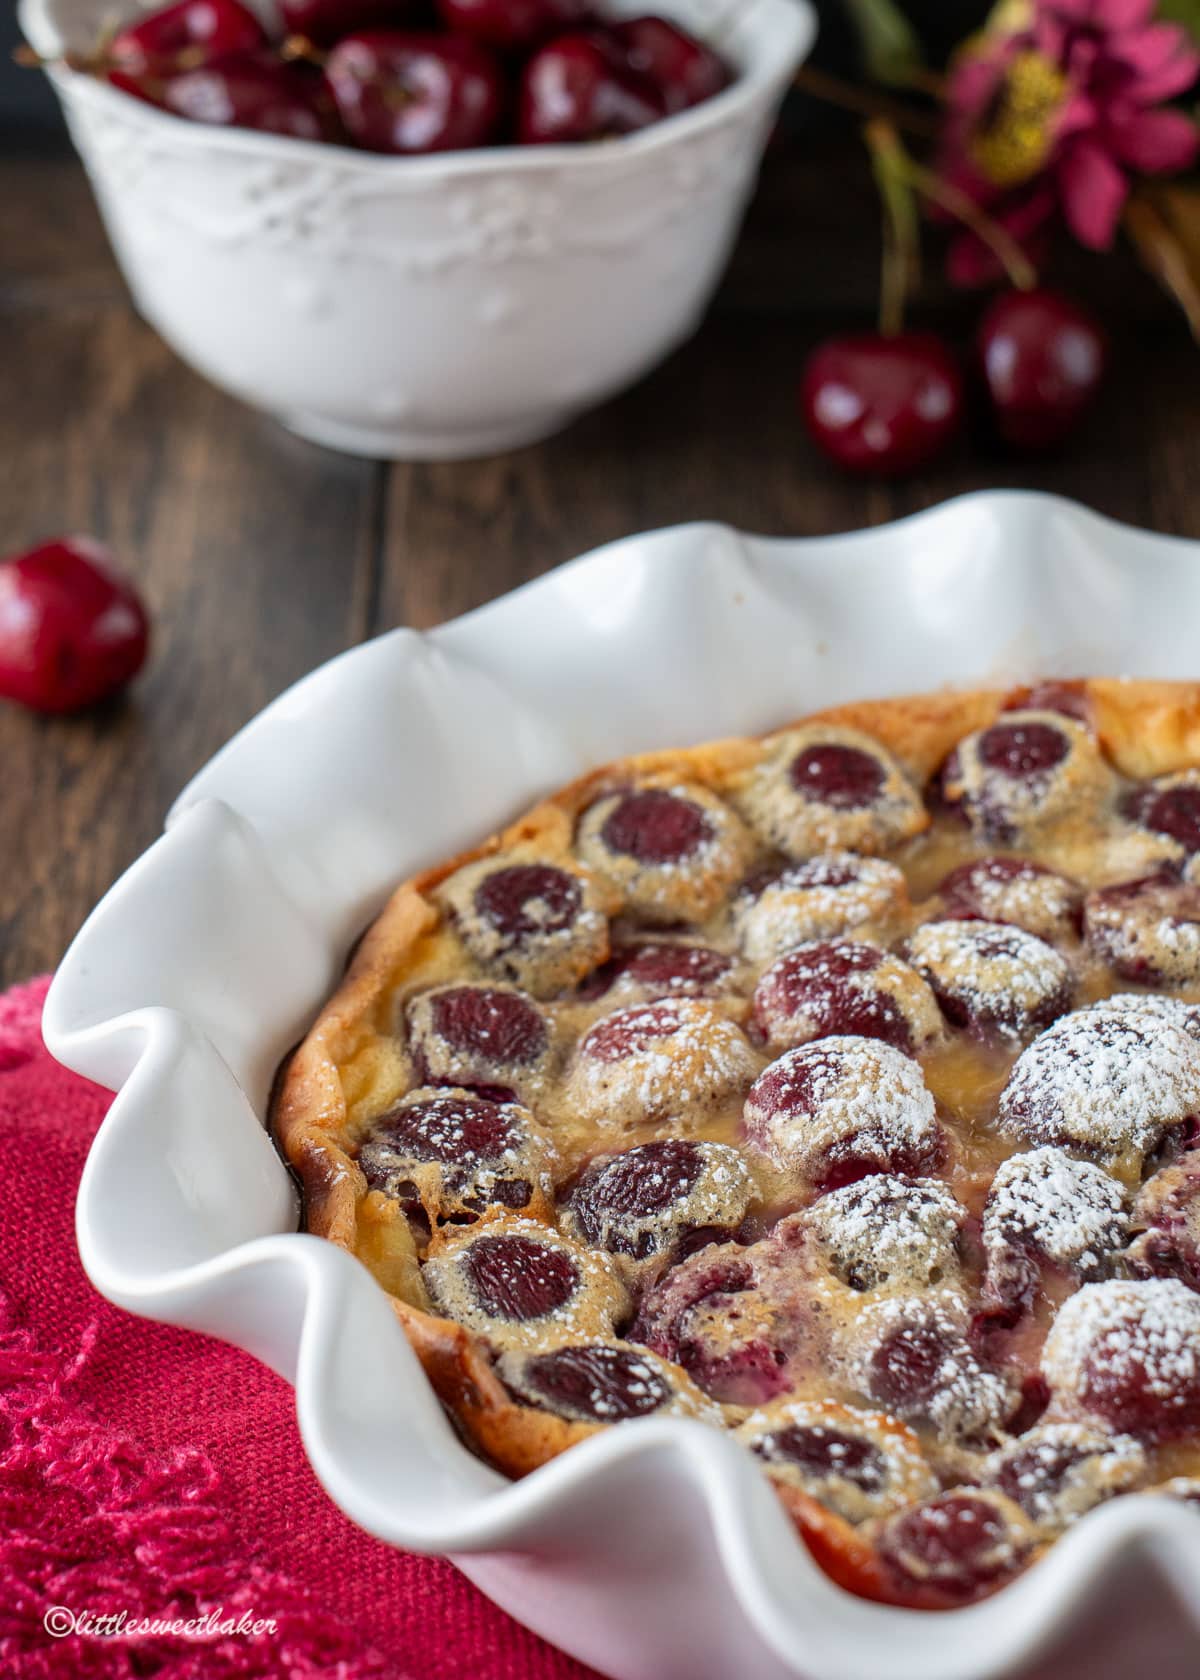 Cherry clafoutis baked in a white pie plate dusted with powdered sugar.